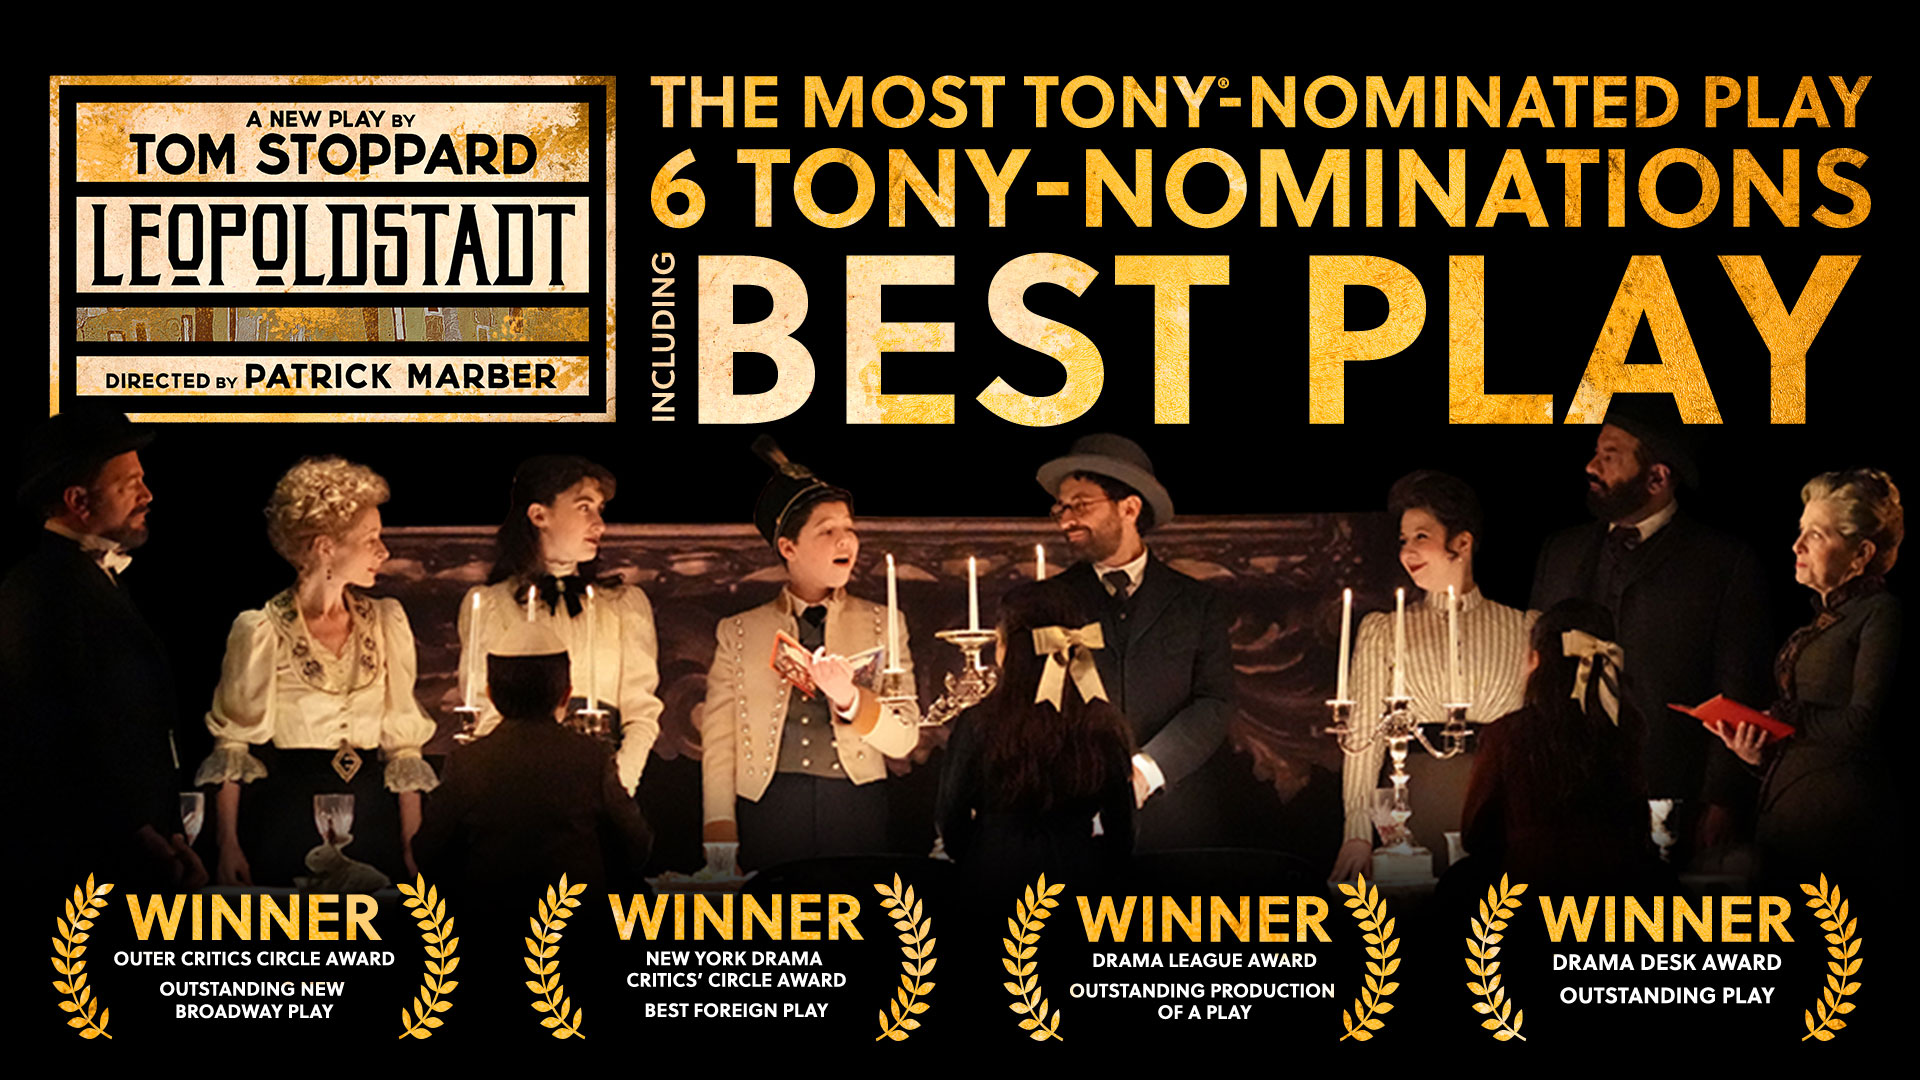 Leopoldstadt | Most Nominated New Broadway Play - Outer Critics Circle Awards | Outstanding Production of a Play | Drama League Award Nominee